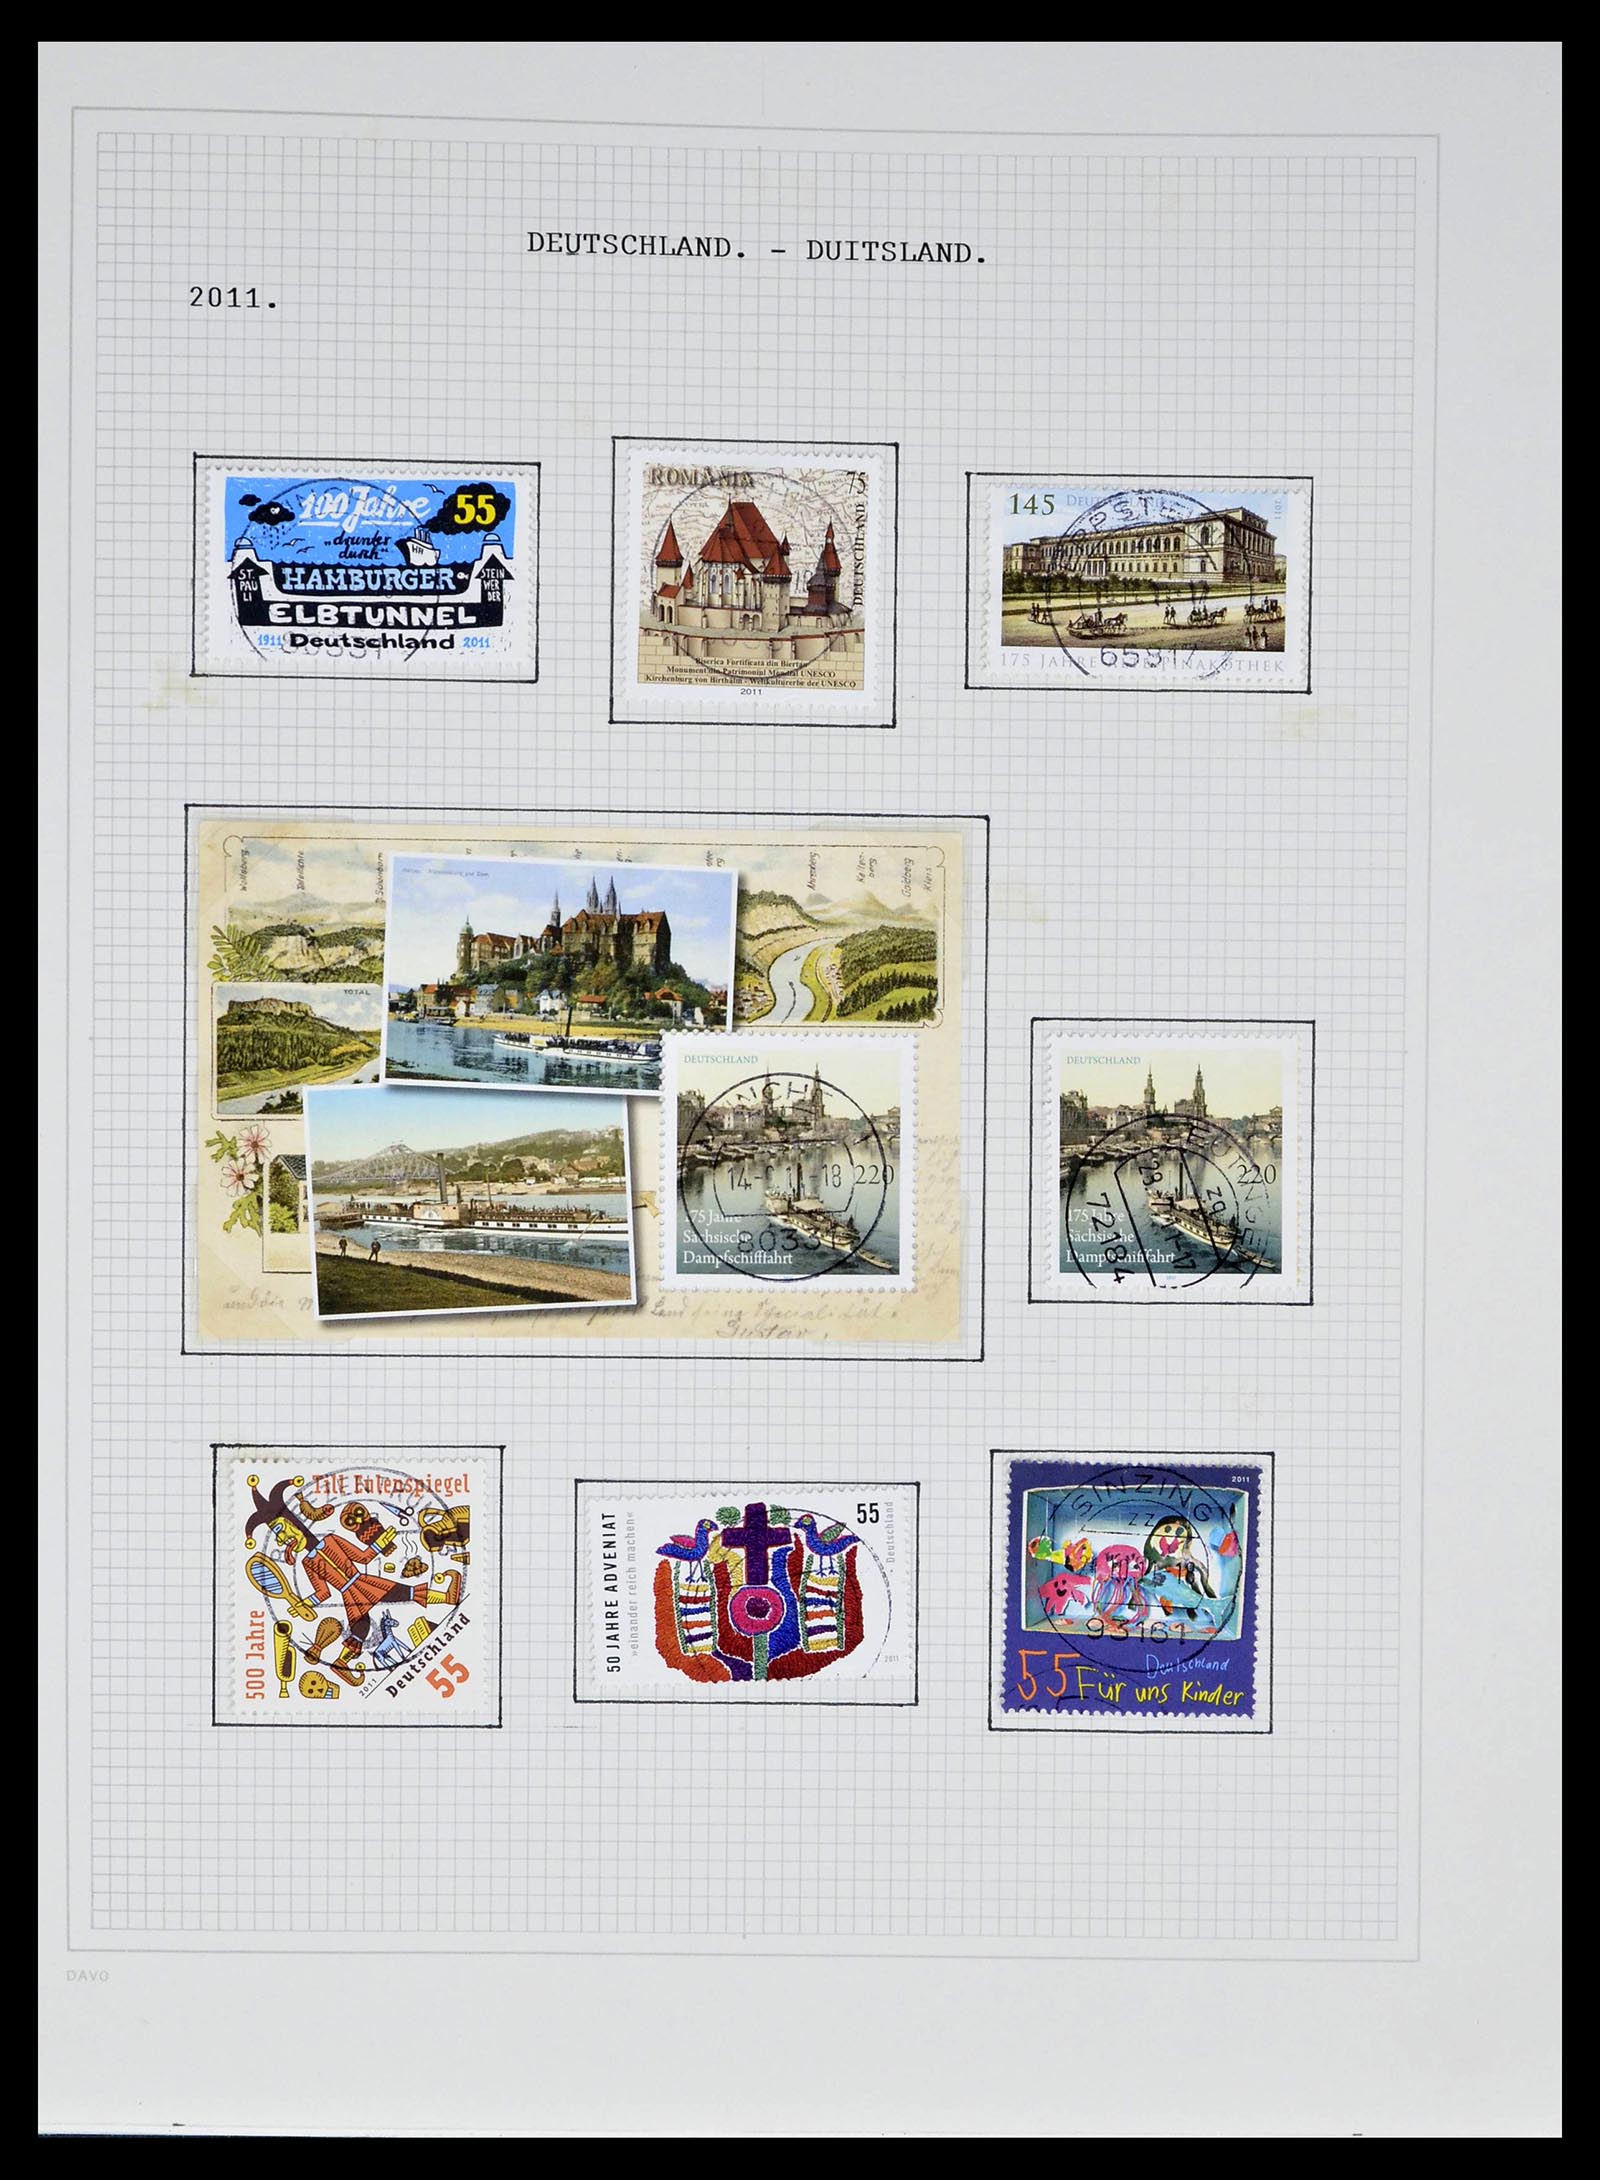 39324 0204 - Stamp collection 39324 Bundespost 1986-2012.